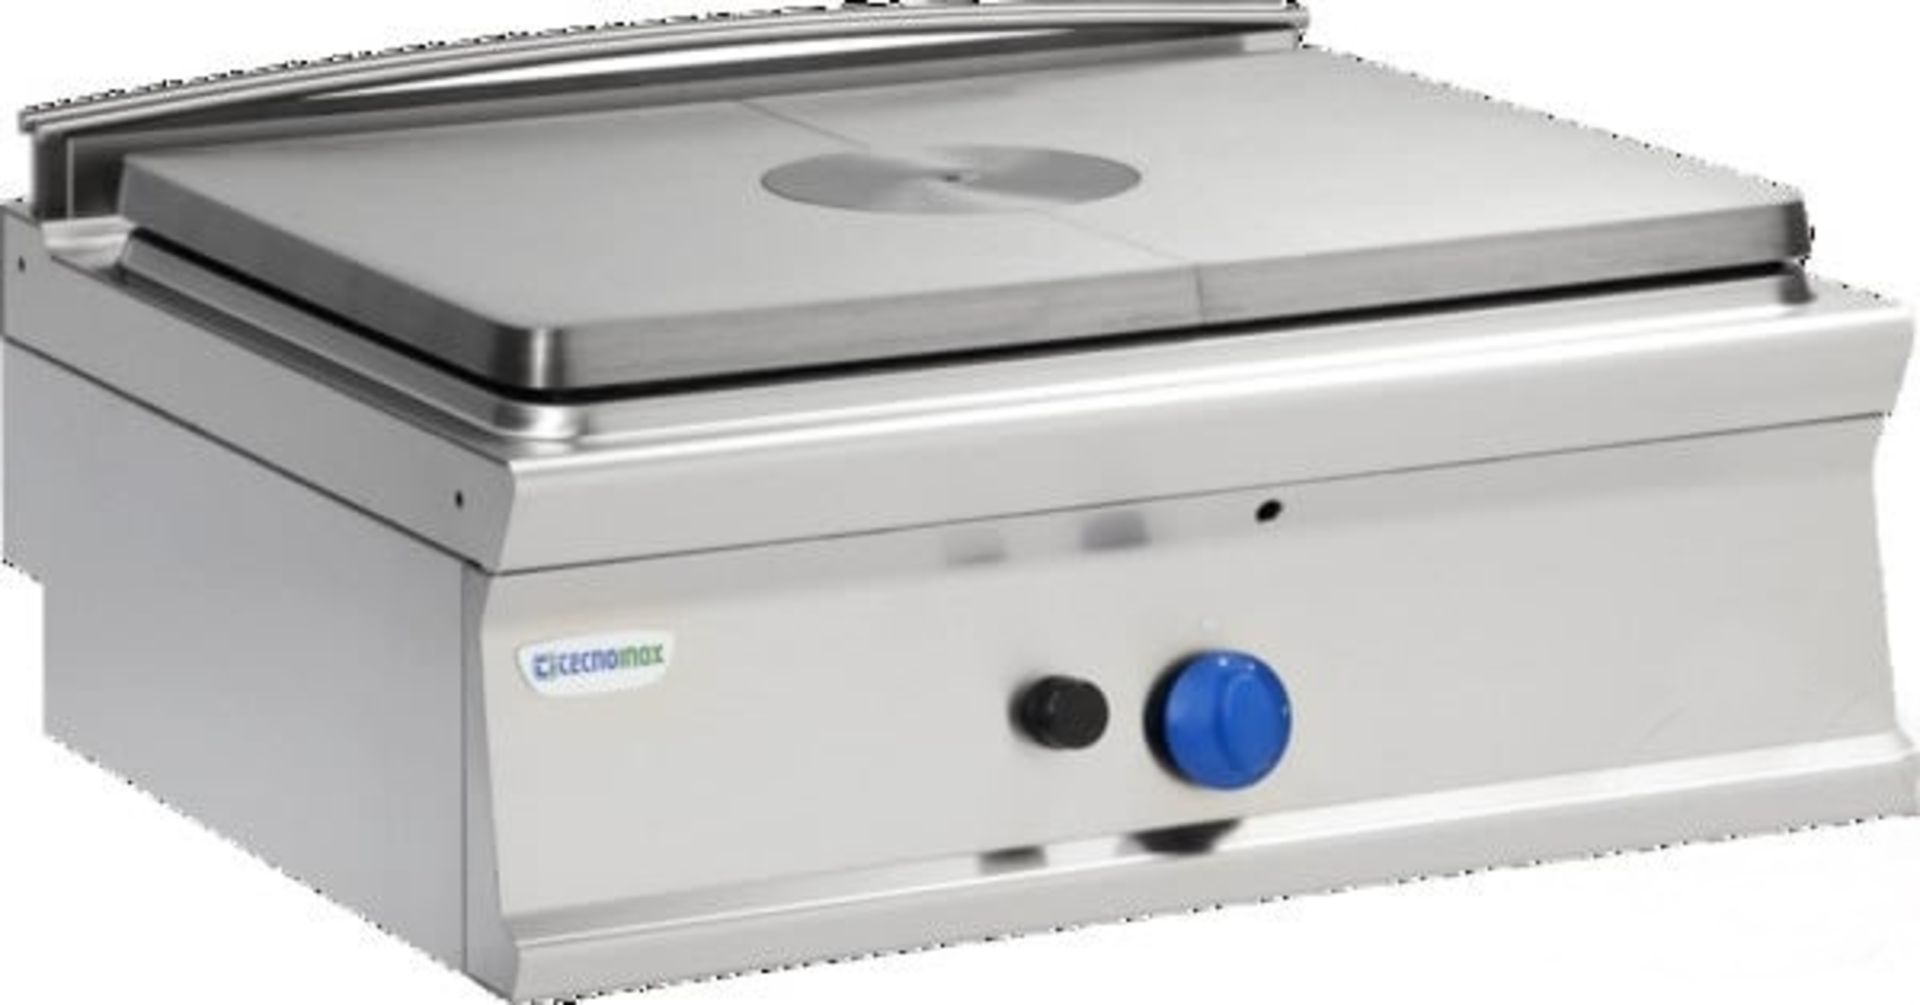 1 x Tecnoinox Solid Top Gas Countertop Cooking Griddle - Model PPC8G7 - 2018 Model - RRP £2,400